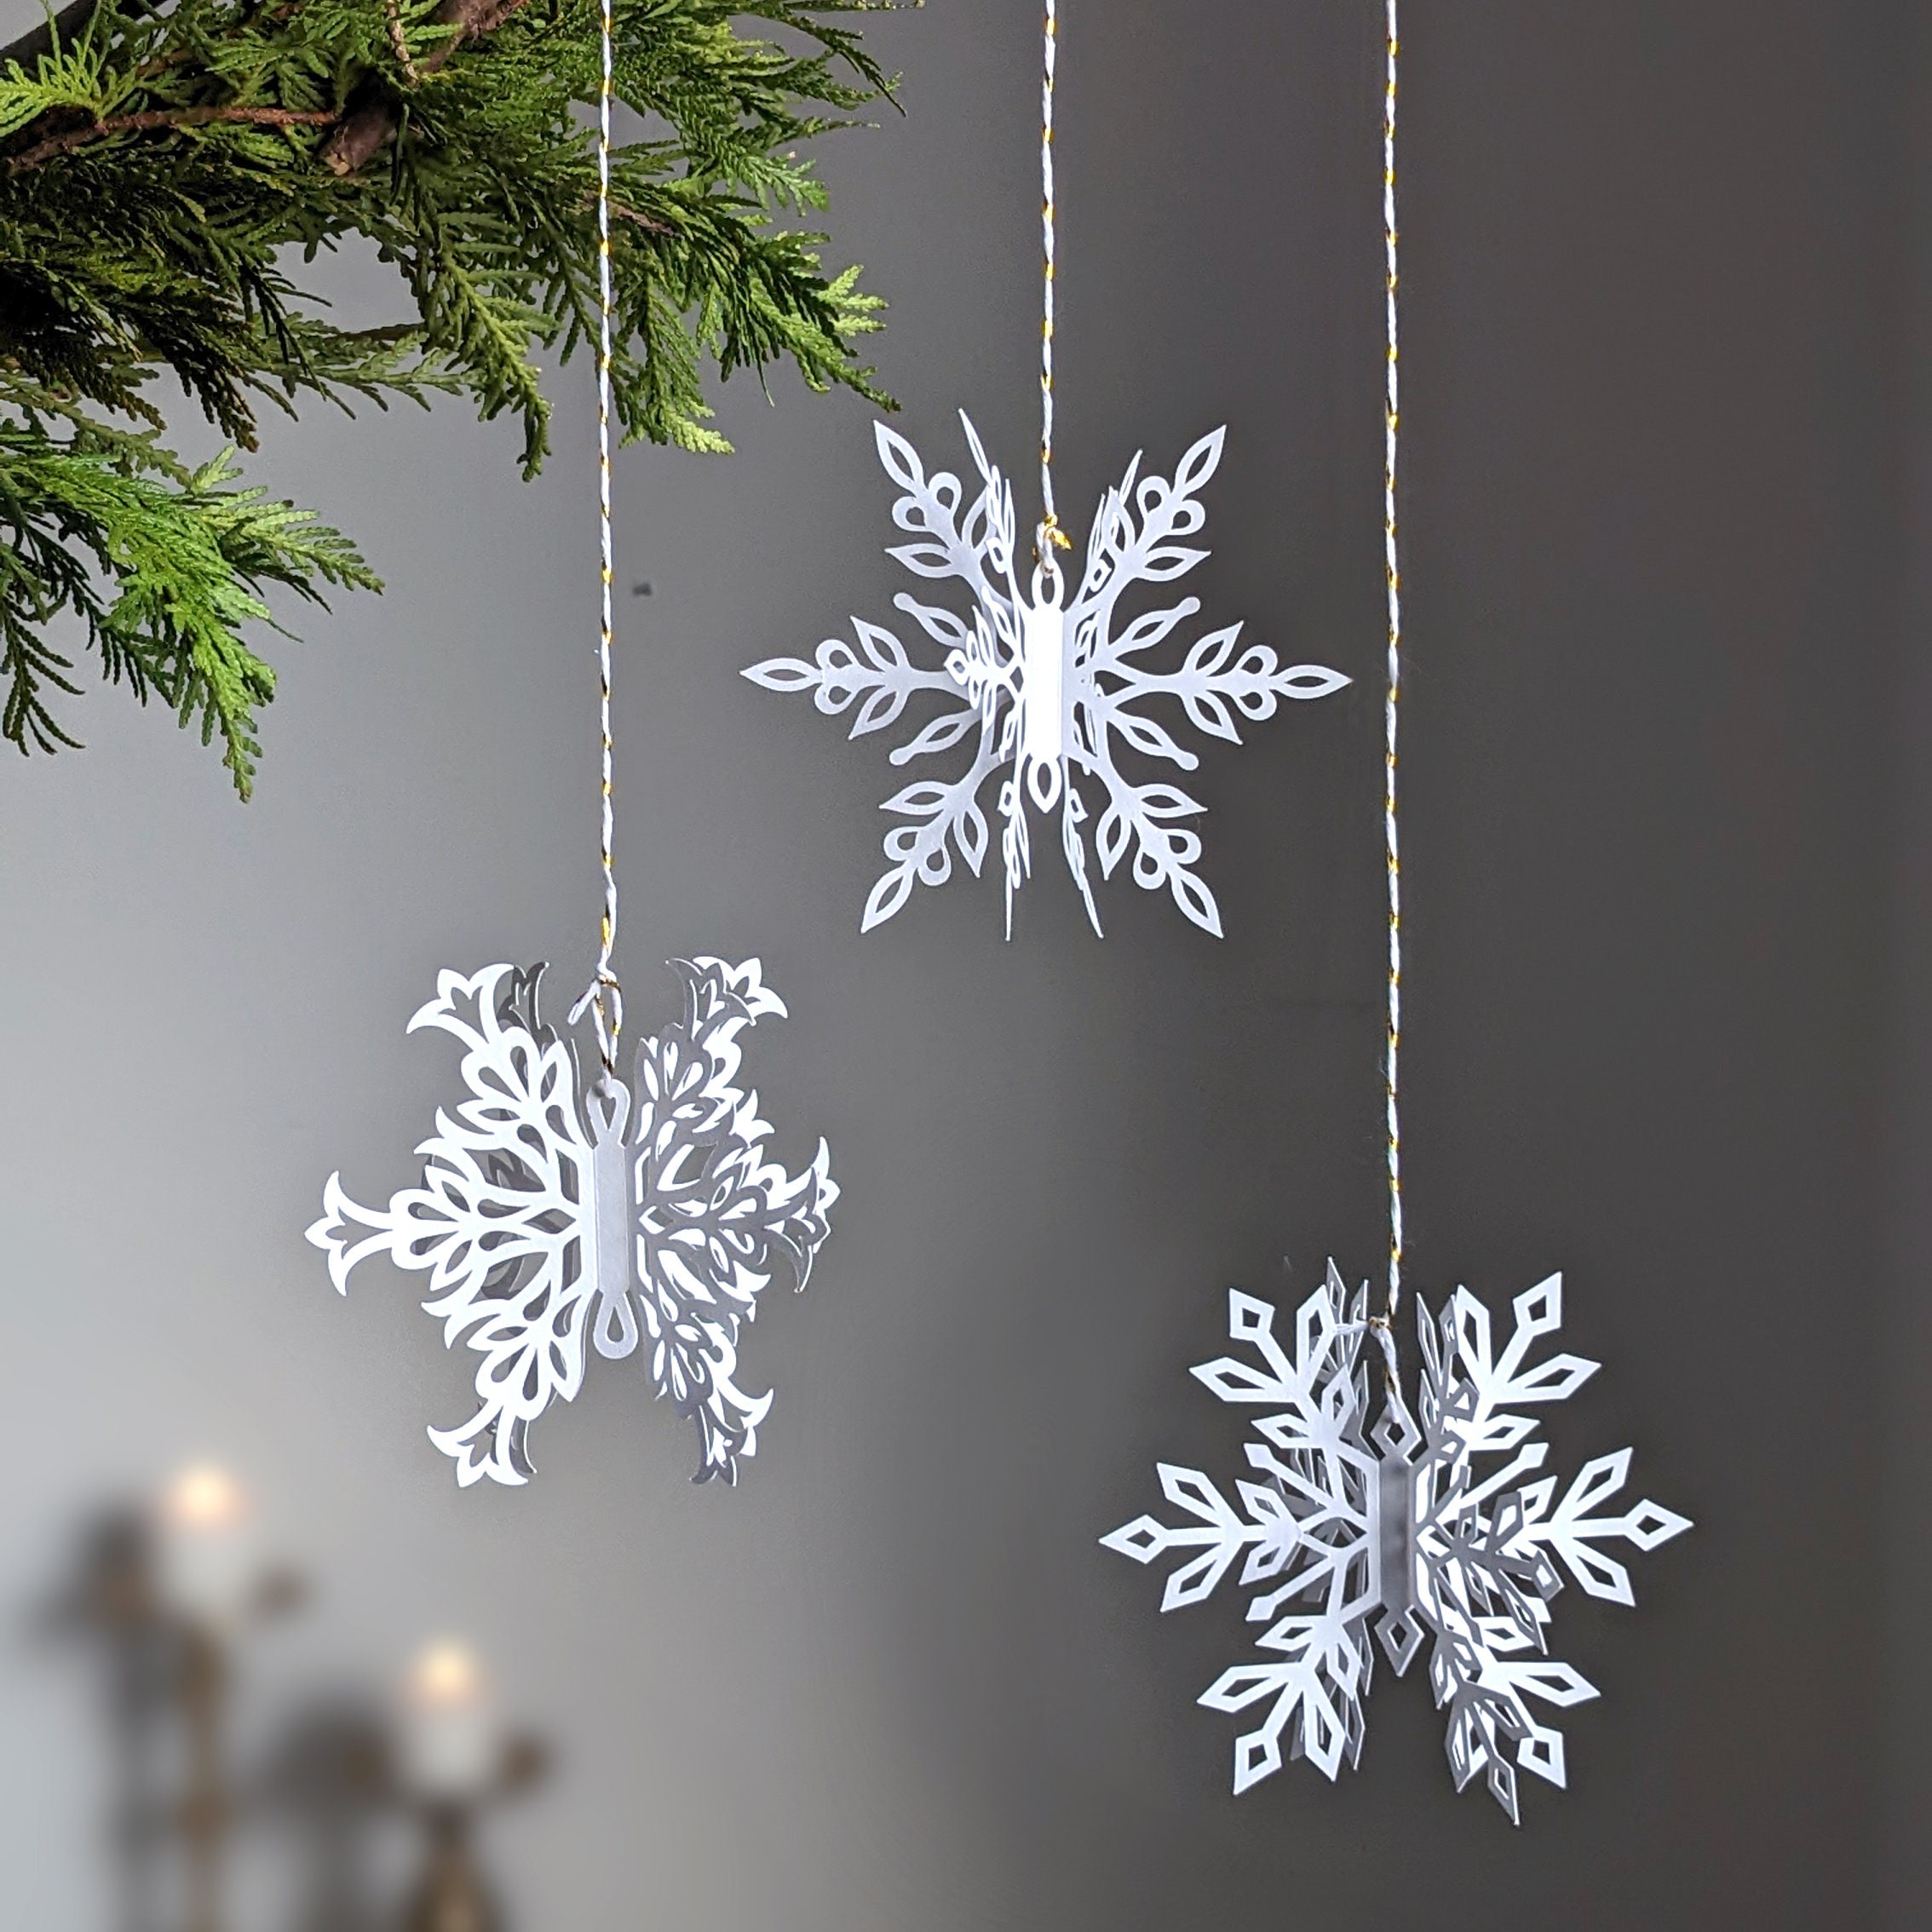 110 PCS Extra Large Snowflake Christmas Window Clings Decals for Glass  Giant White Snowflake Window Decorations Xmas Snowflake Stickers Winter